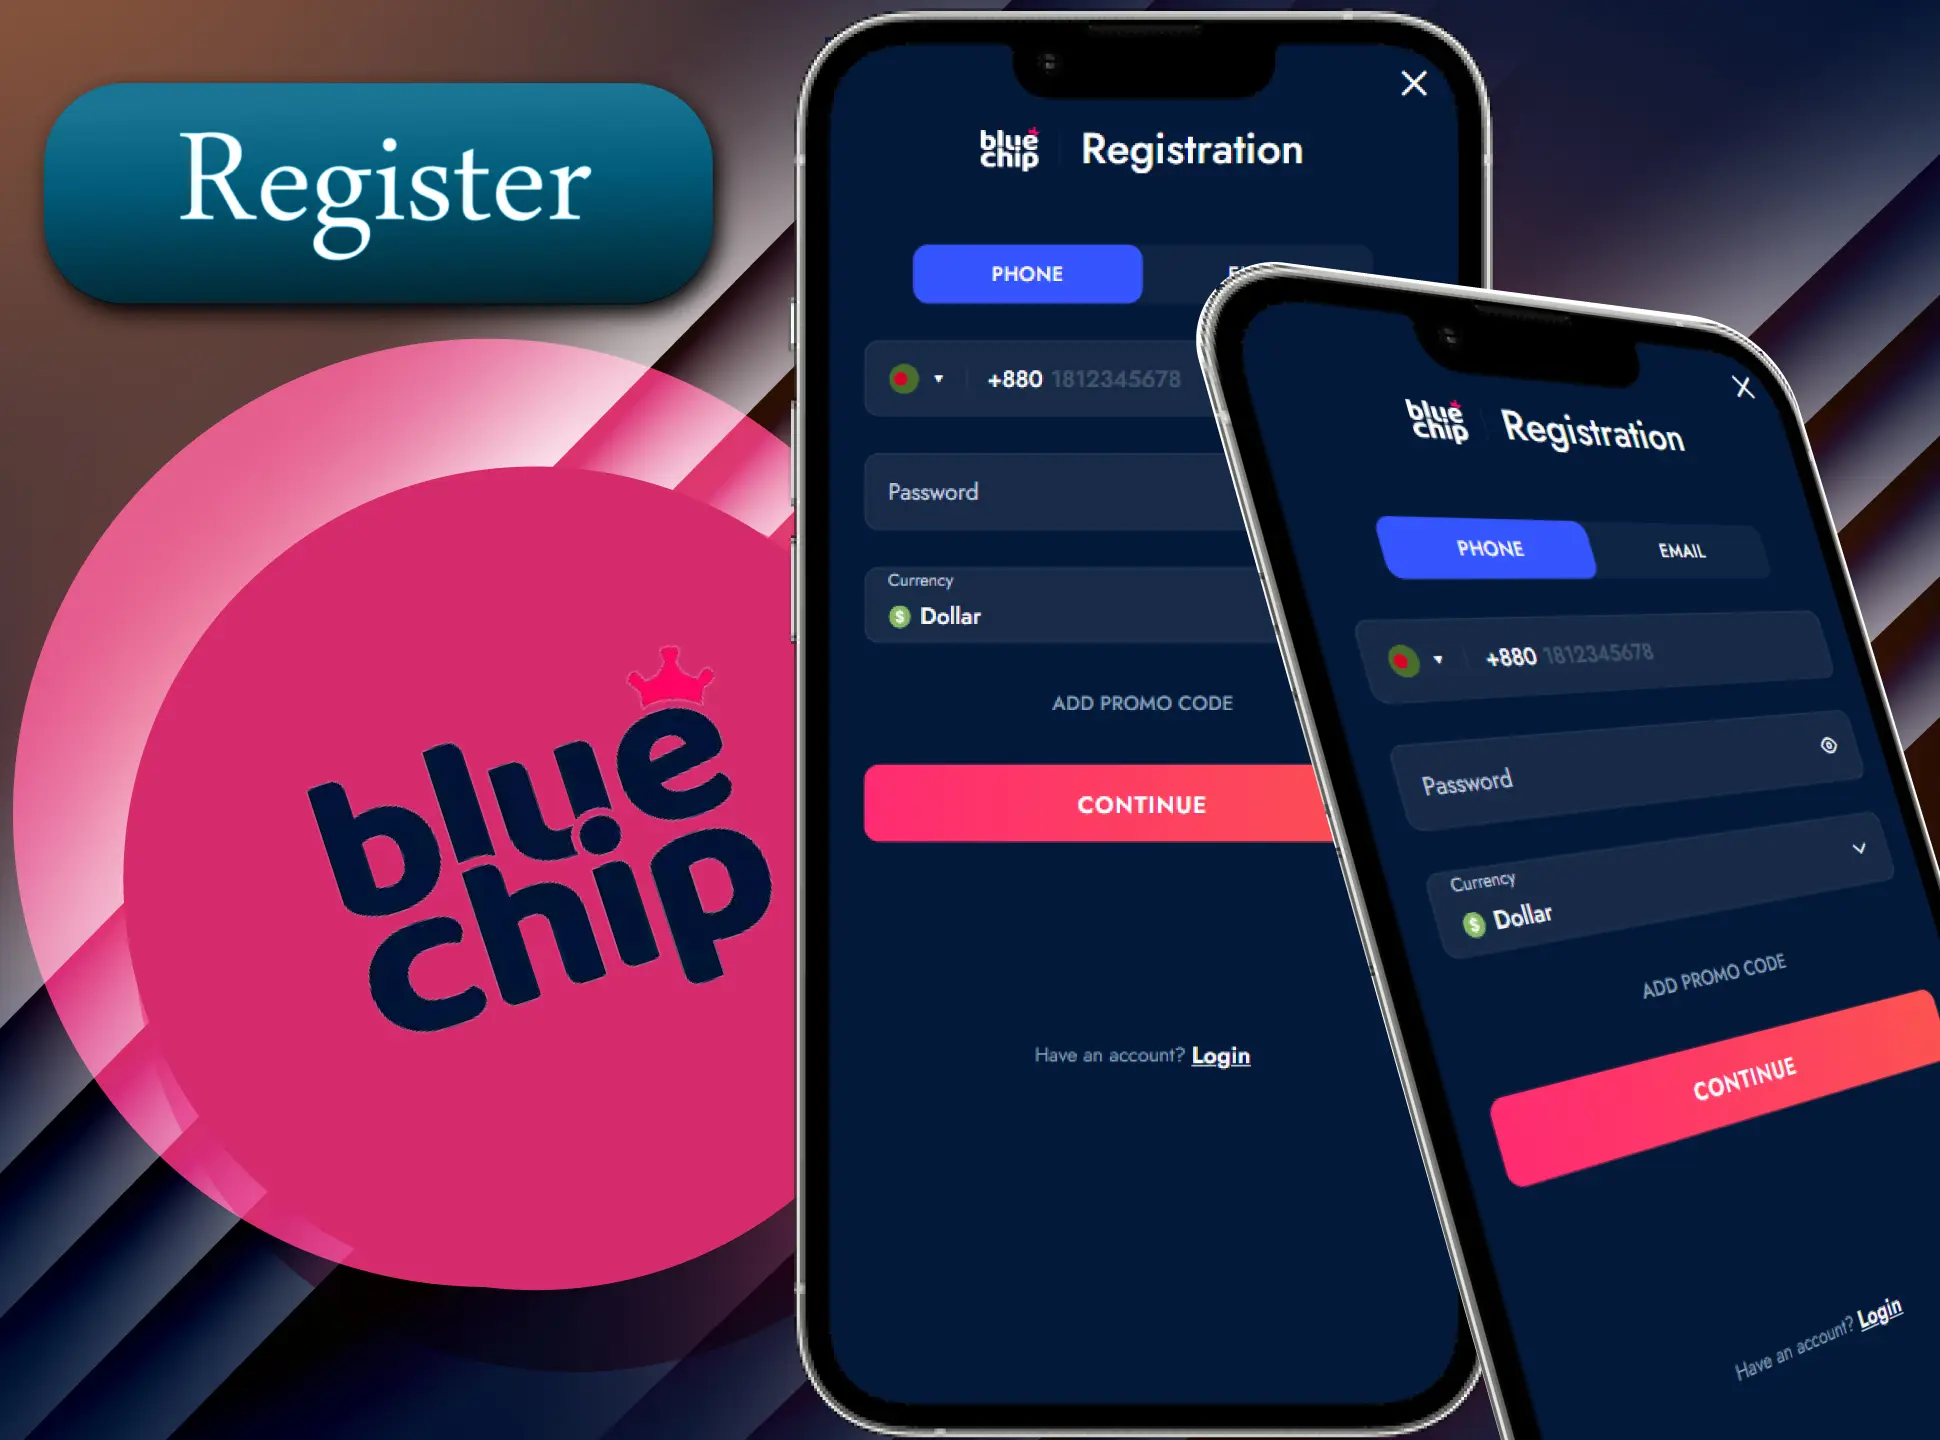 You can easily sign up for the Bluechip betting company via the mobile app.